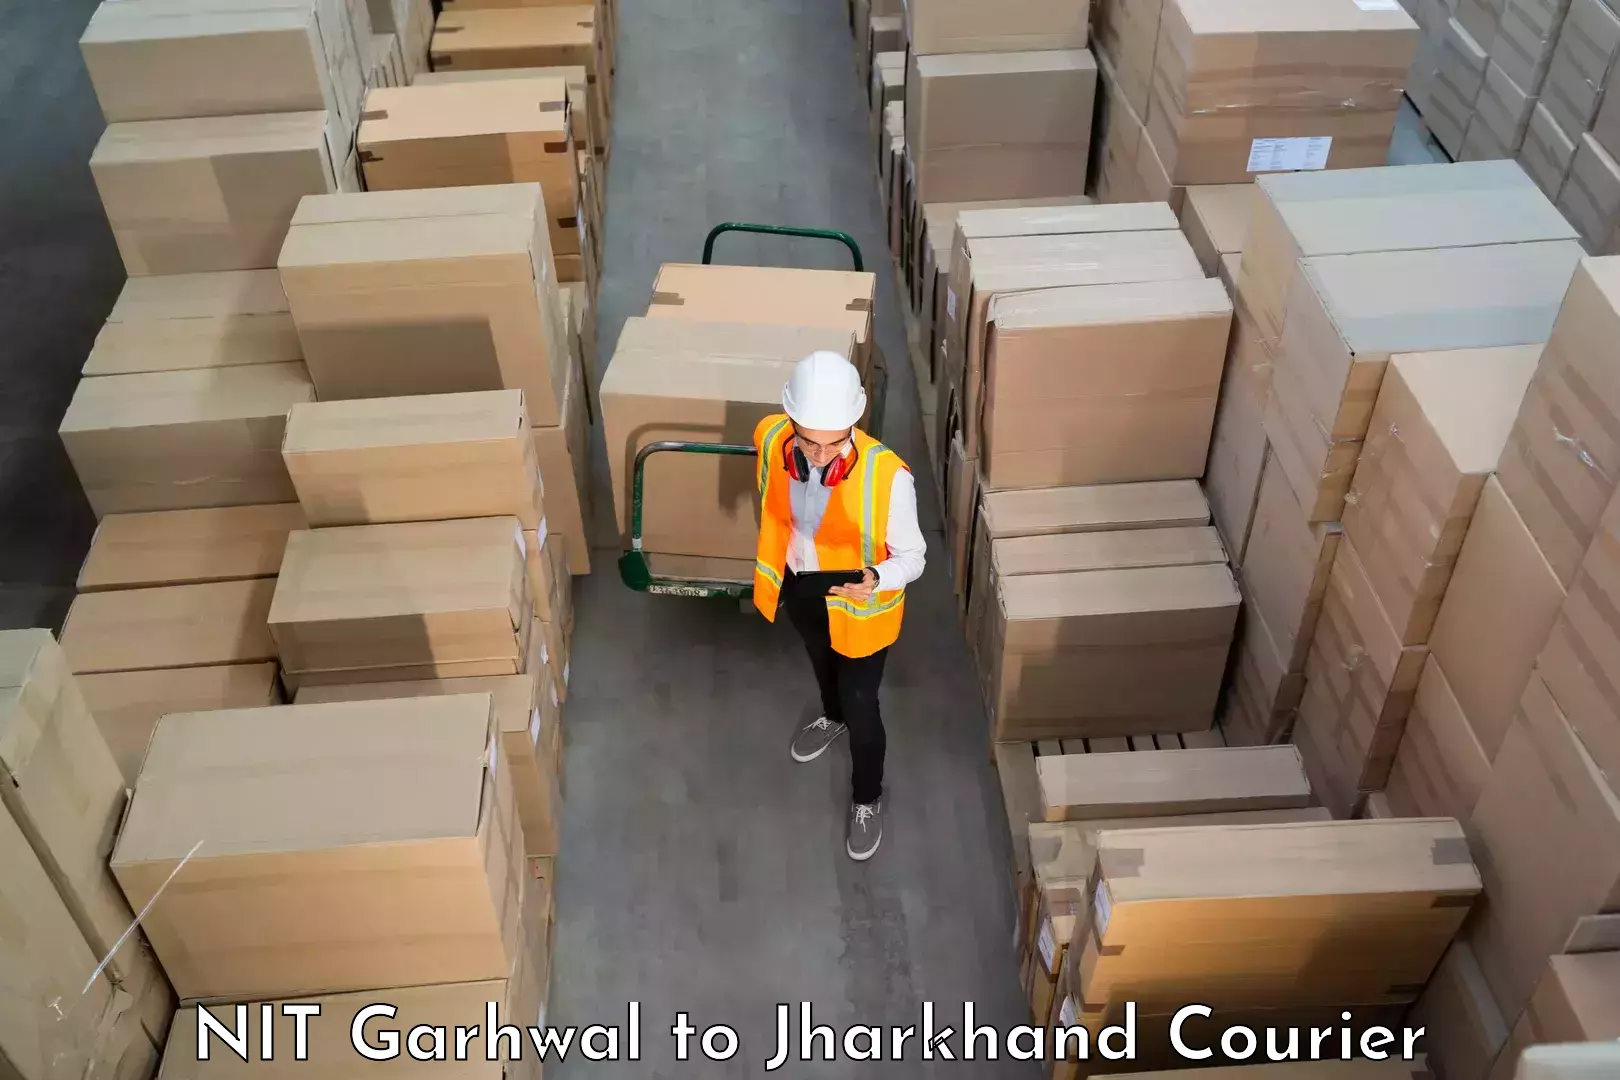 Trusted household movers NIT Garhwal to Seraikella